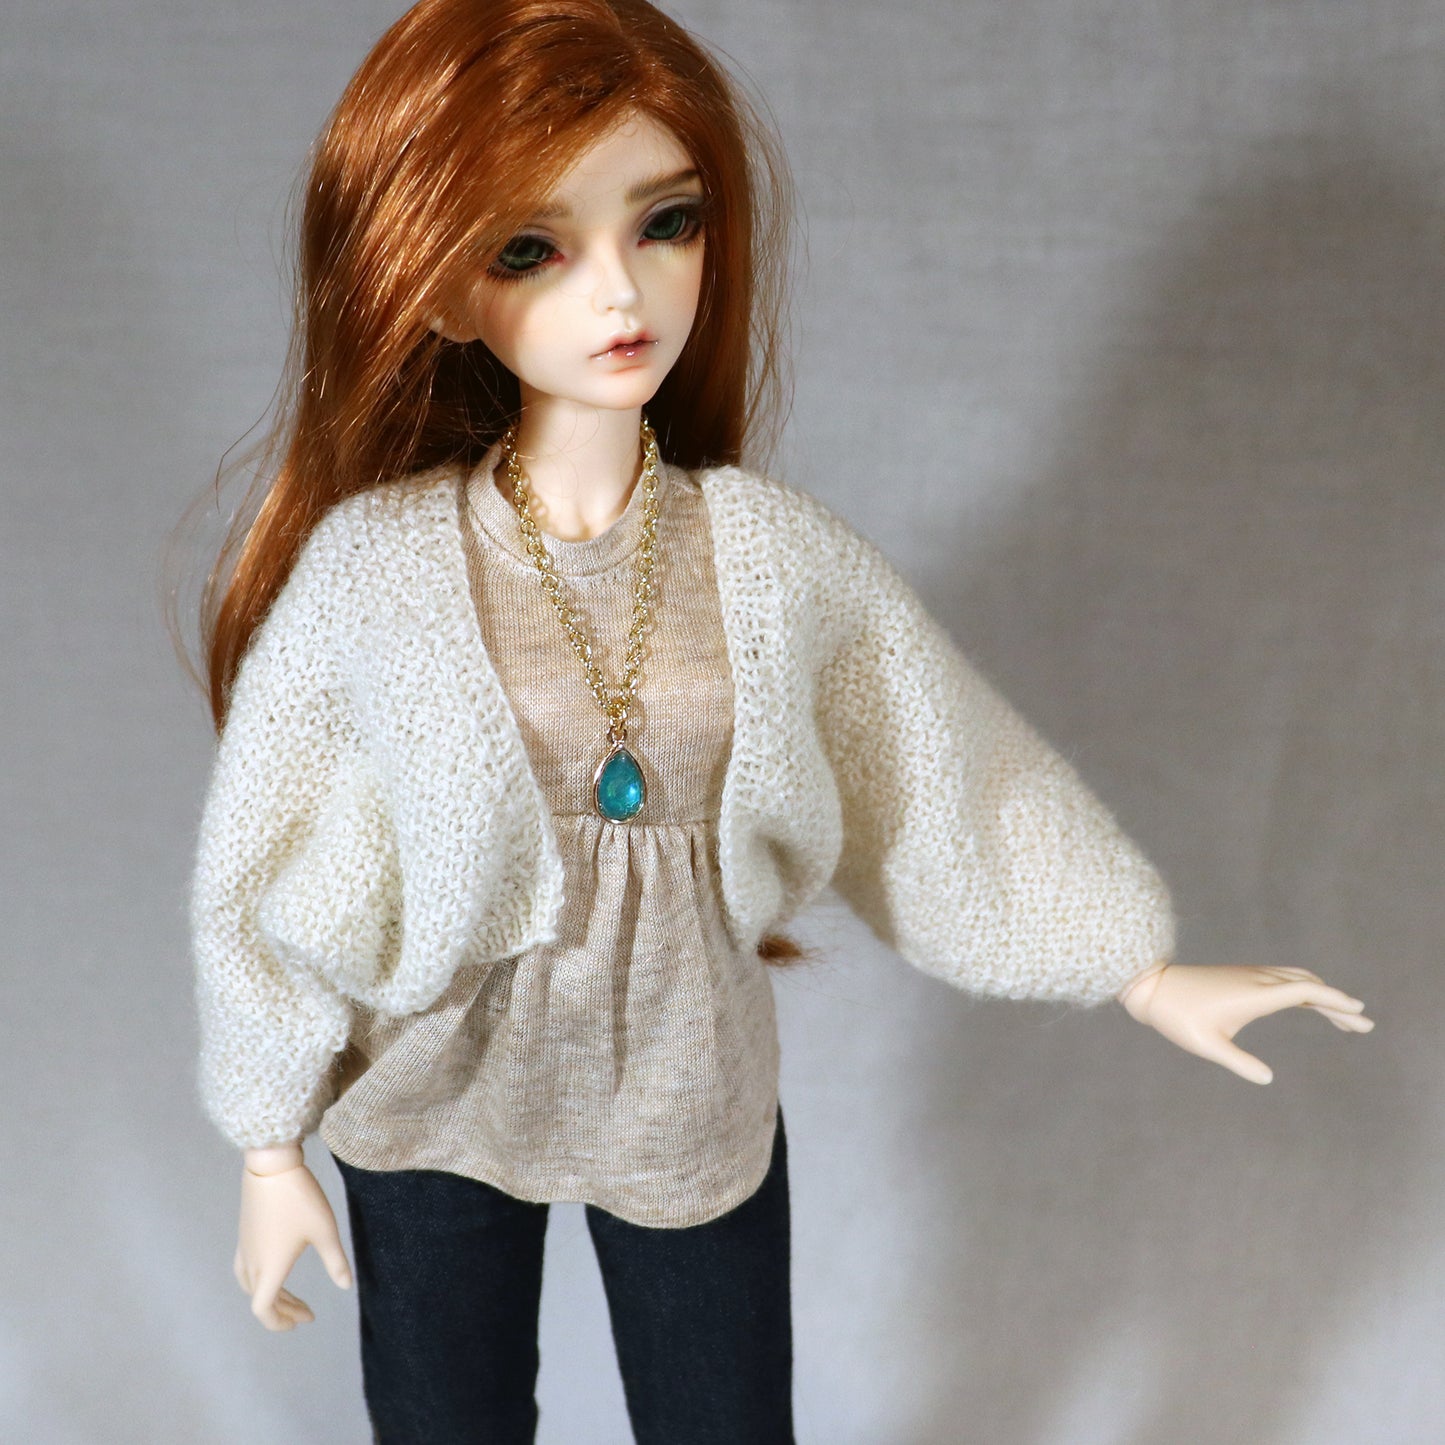 Digital Pattern for Hand Knit Butterfly Shrug for Slim MSD such as Minifee